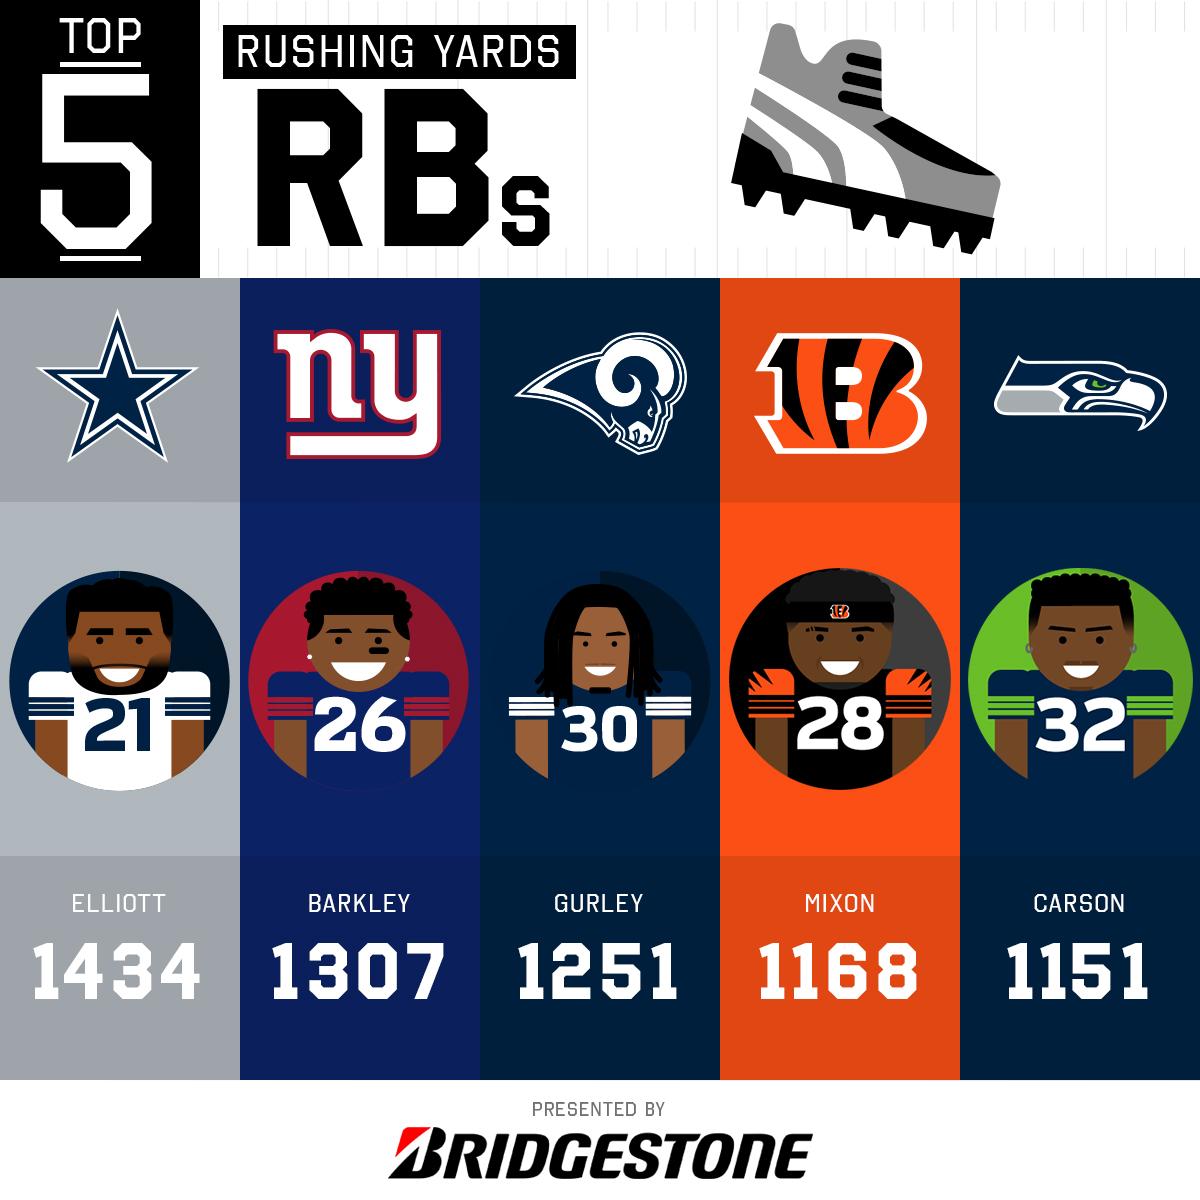 2018 Nfl Rushing Title